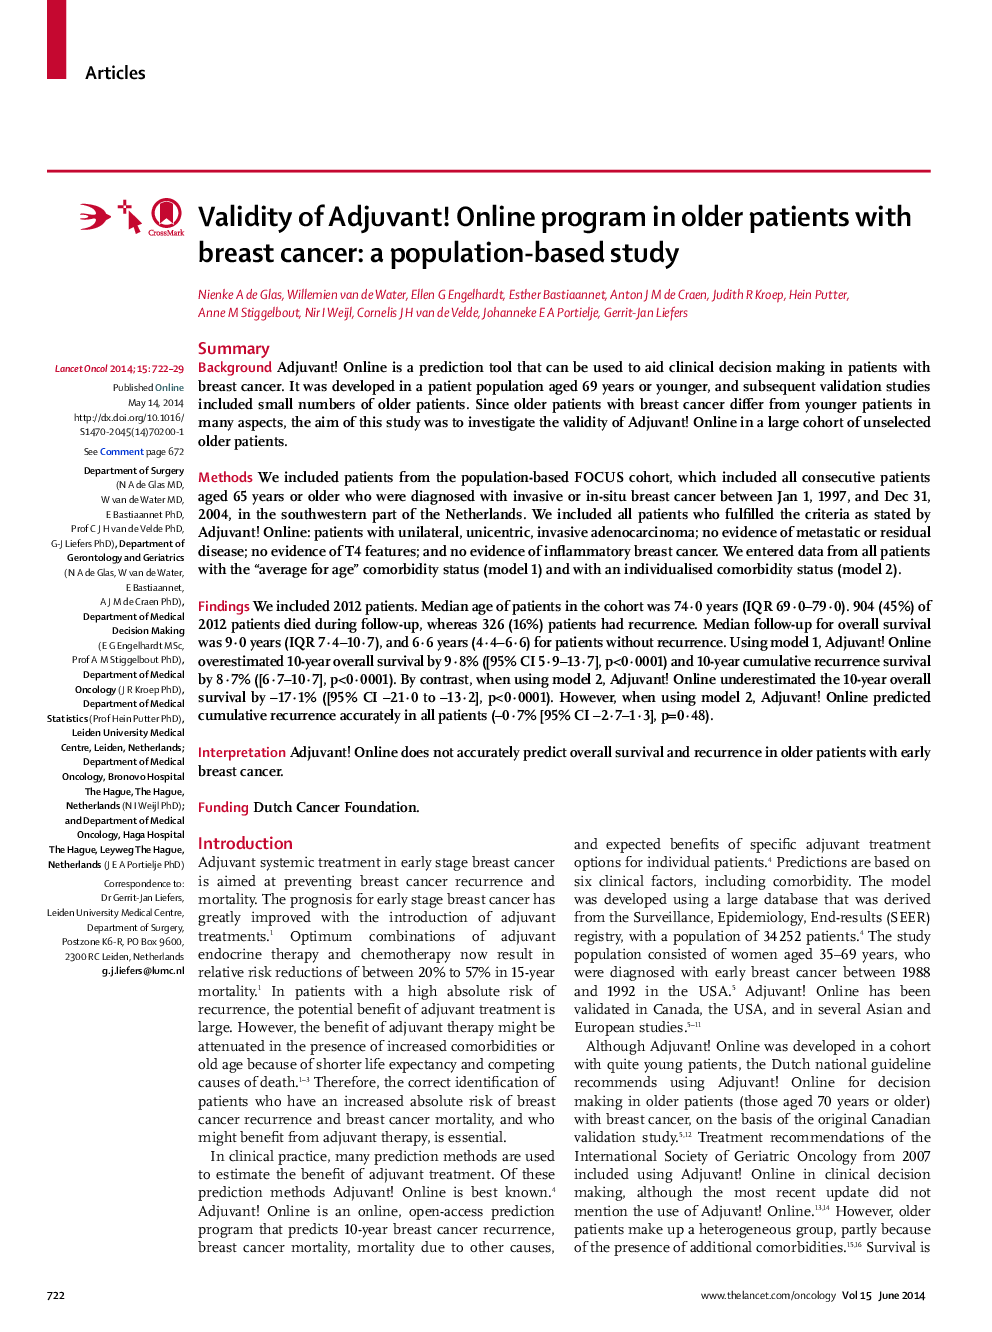 Validity of Adjuvant! Online program in older patients with breast cancer: a population-based study